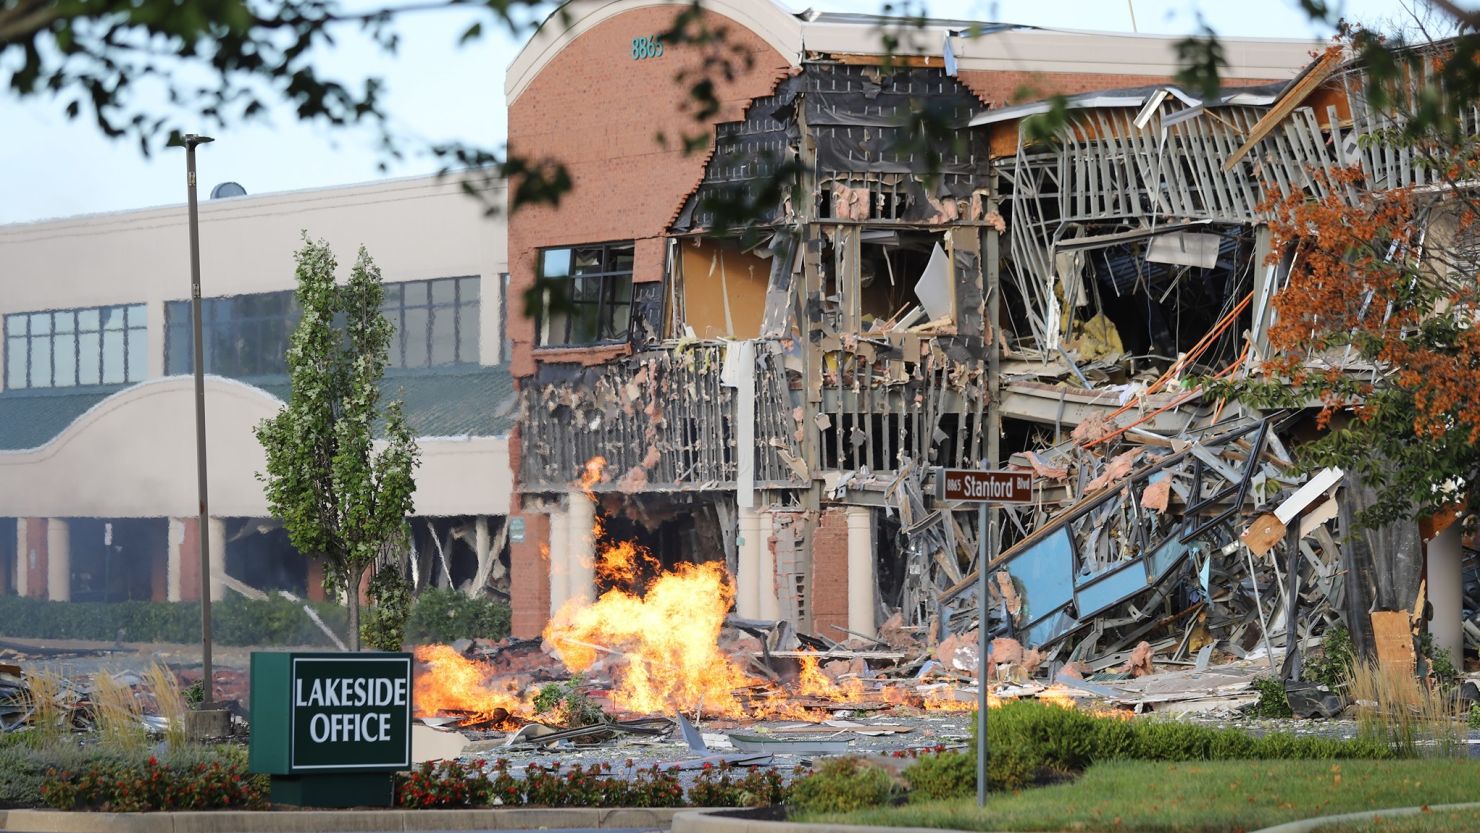 A gas explosion at a shopping center in Columbia, Maryland, caused the front of an office building to collapse.